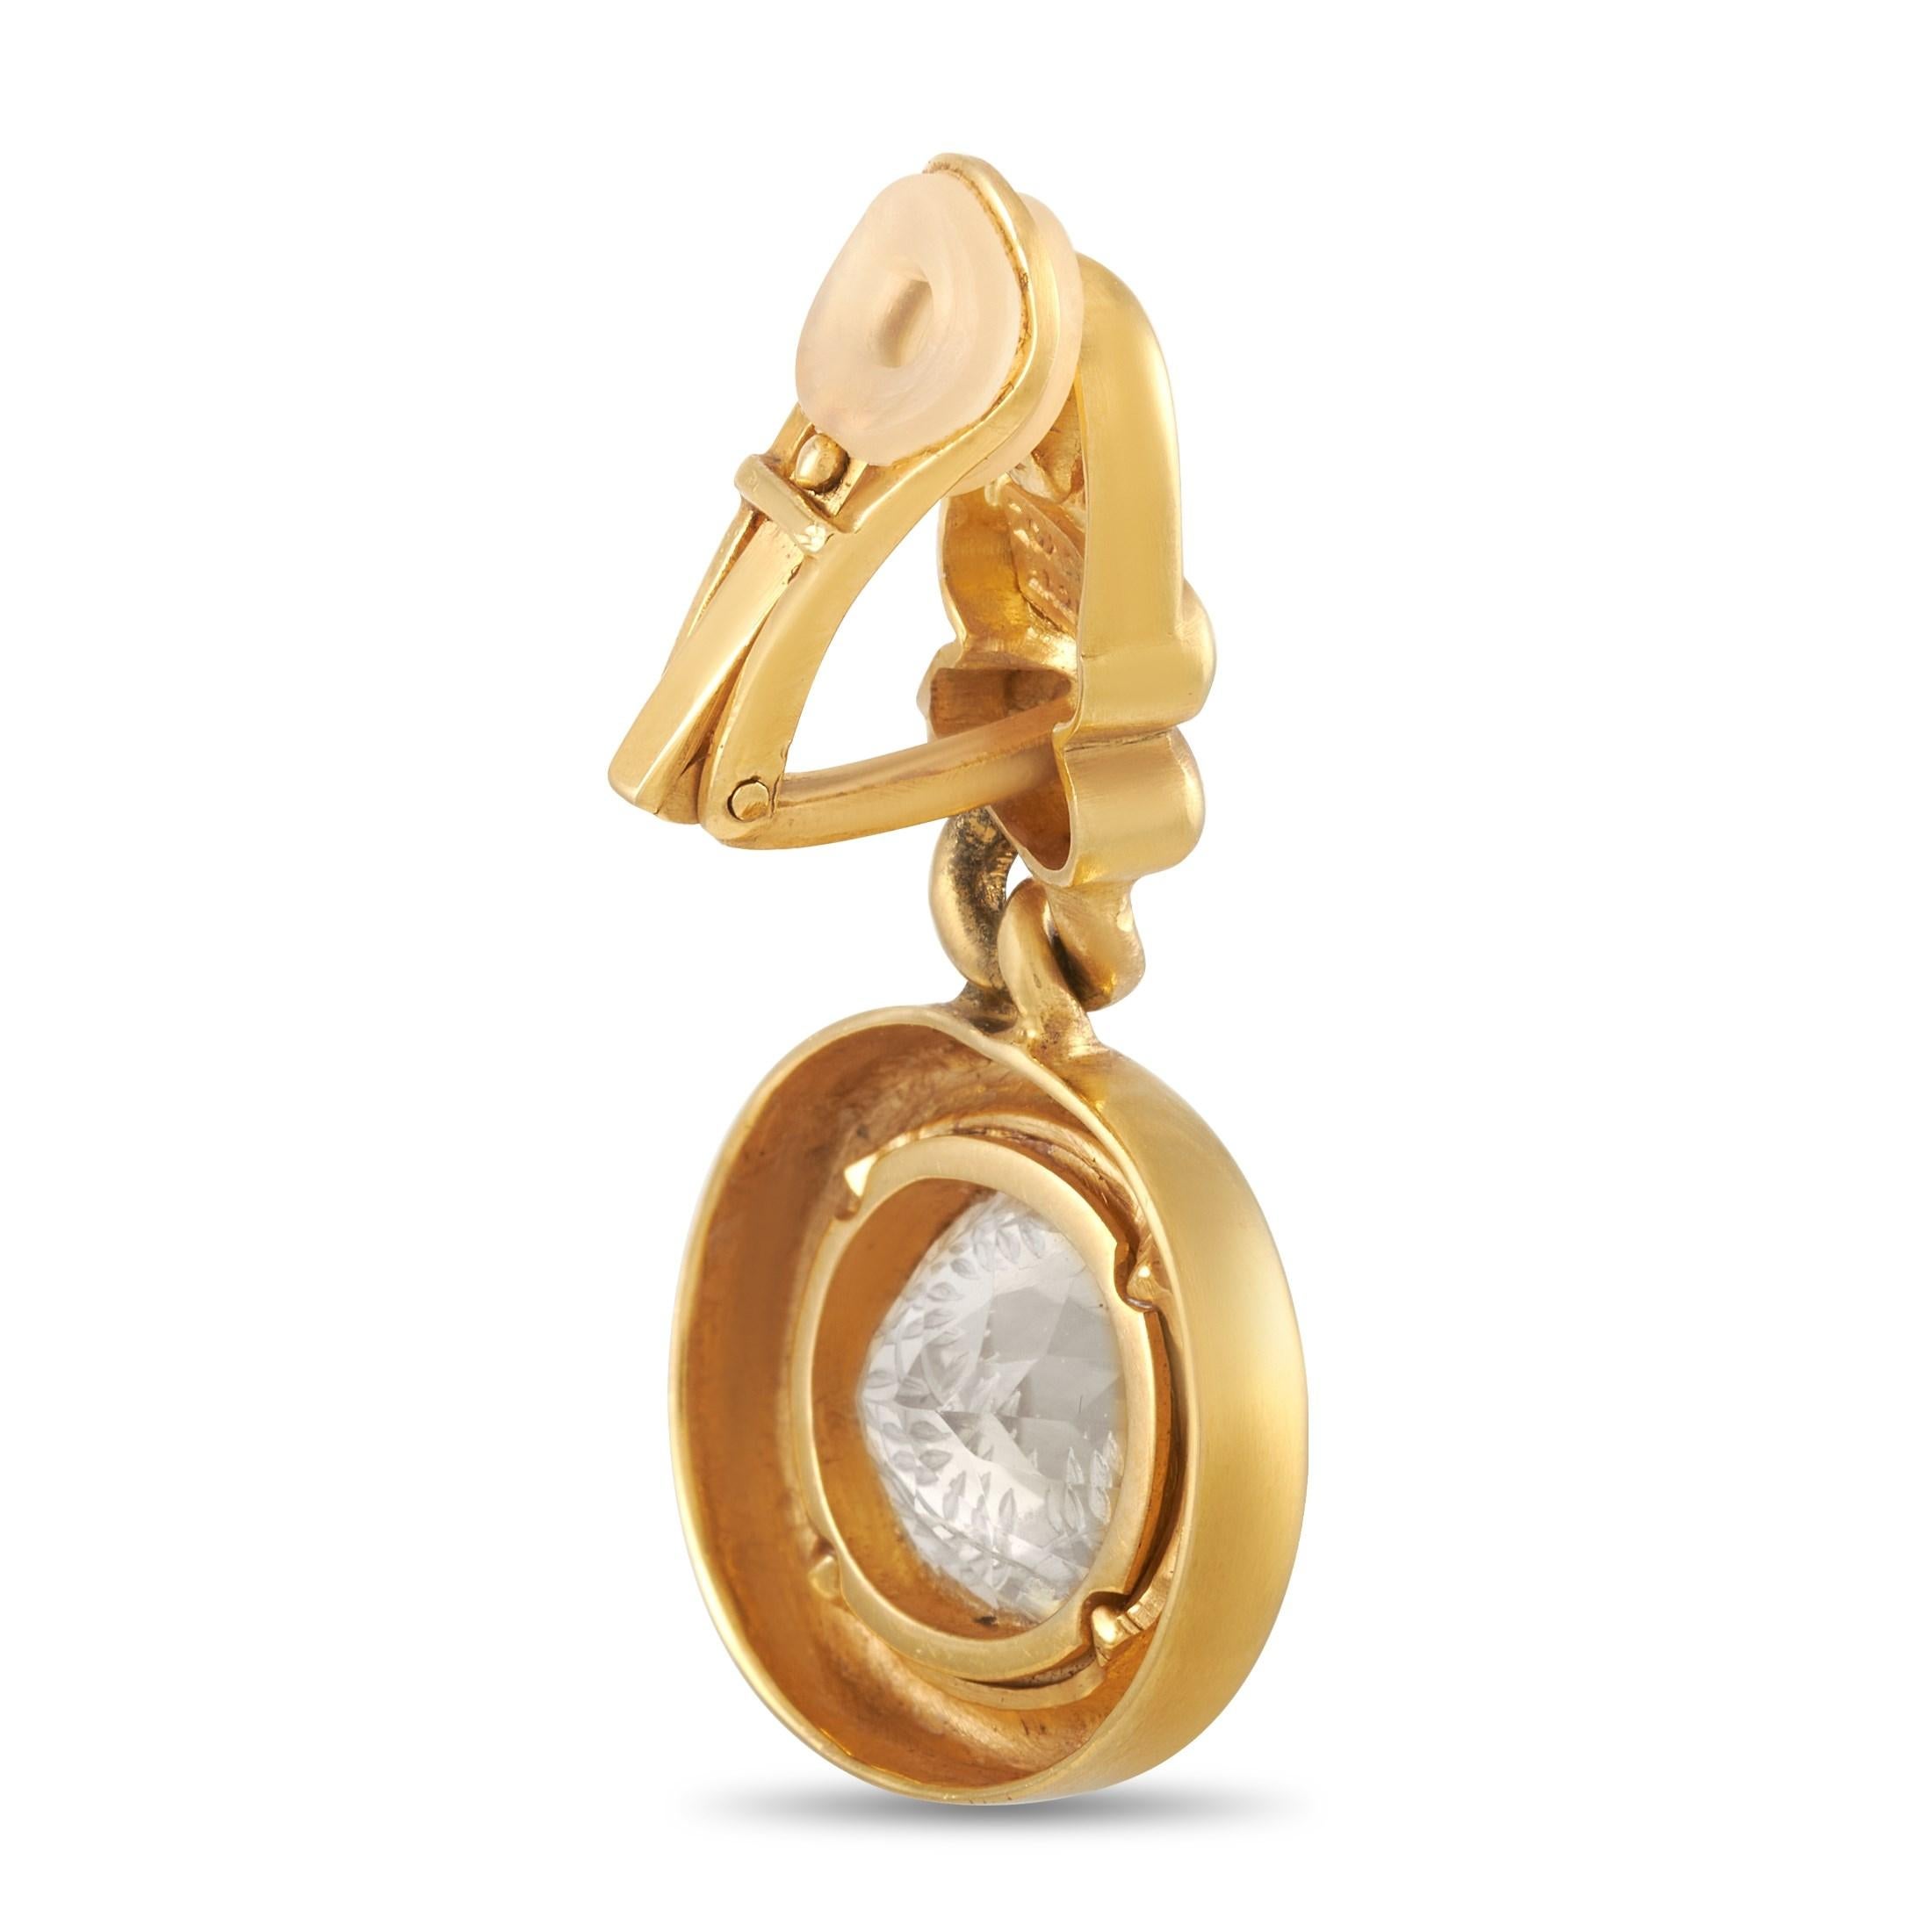 The Zolotas Intaglio 18K Yellow Gold Citrine Vintage Drop Earrings from the Greek house of jewels prove to be a masterpiece. This intricately, exquisitely, and expertly crafted pair of earrings has withstood the test of time and is a testament to